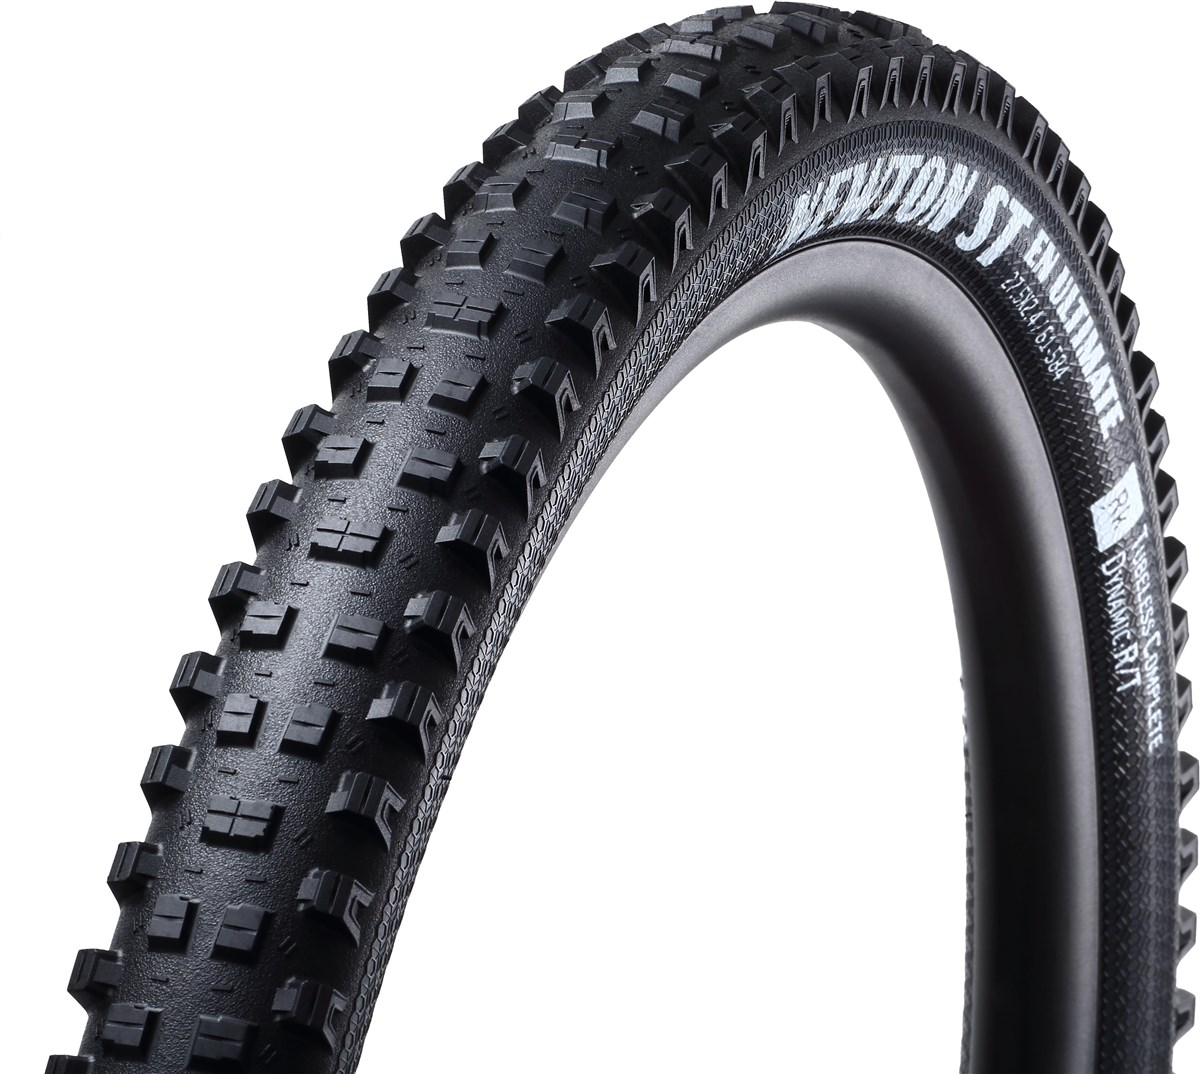 Goodyear Newton-ST EN Ultimate Tubeless Complete Dynamic-R/T 650B/27.5" MTB Tyre product image